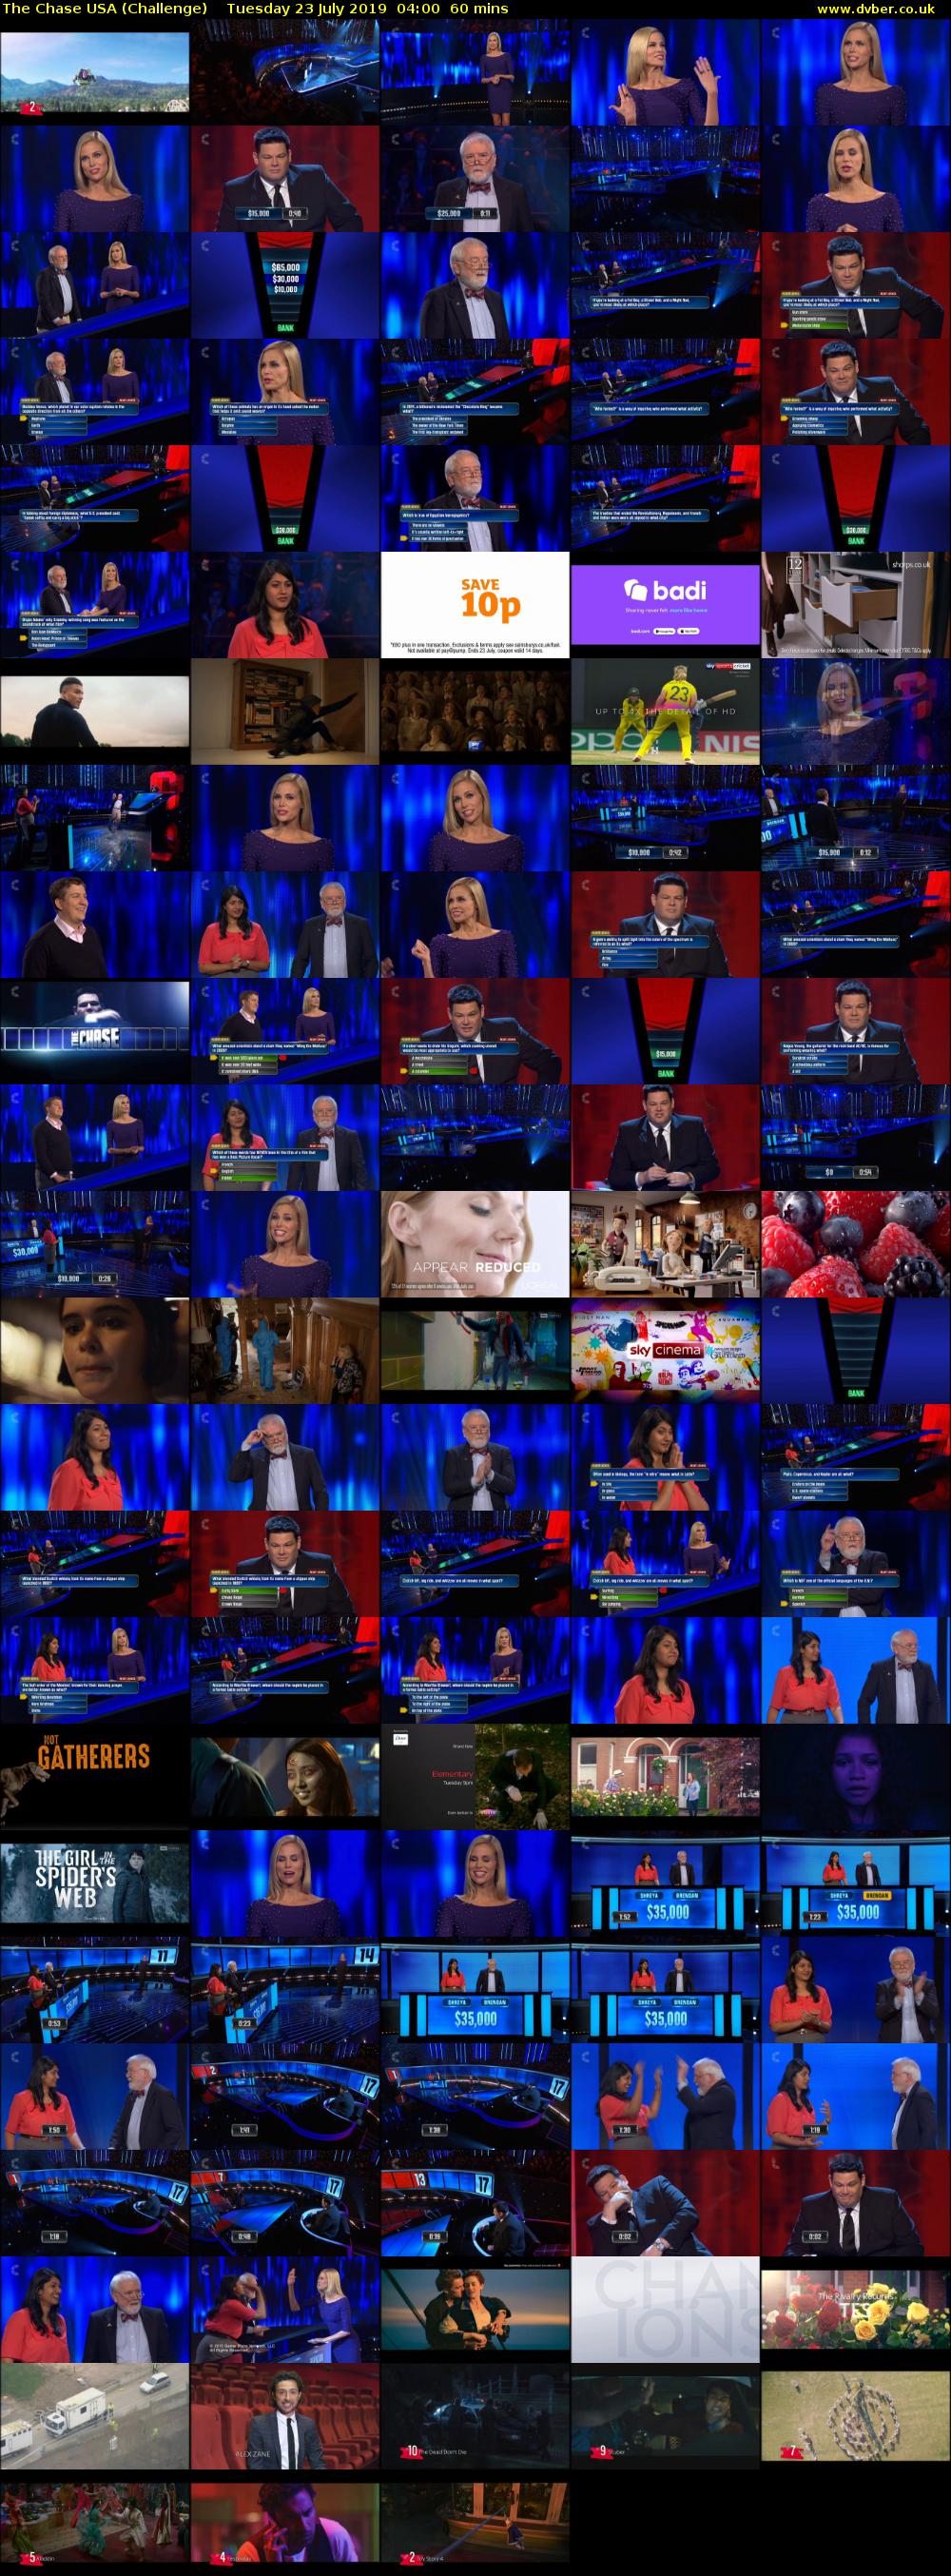 The Chase USA (Challenge) Tuesday 23 July 2019 04:00 - 05:00